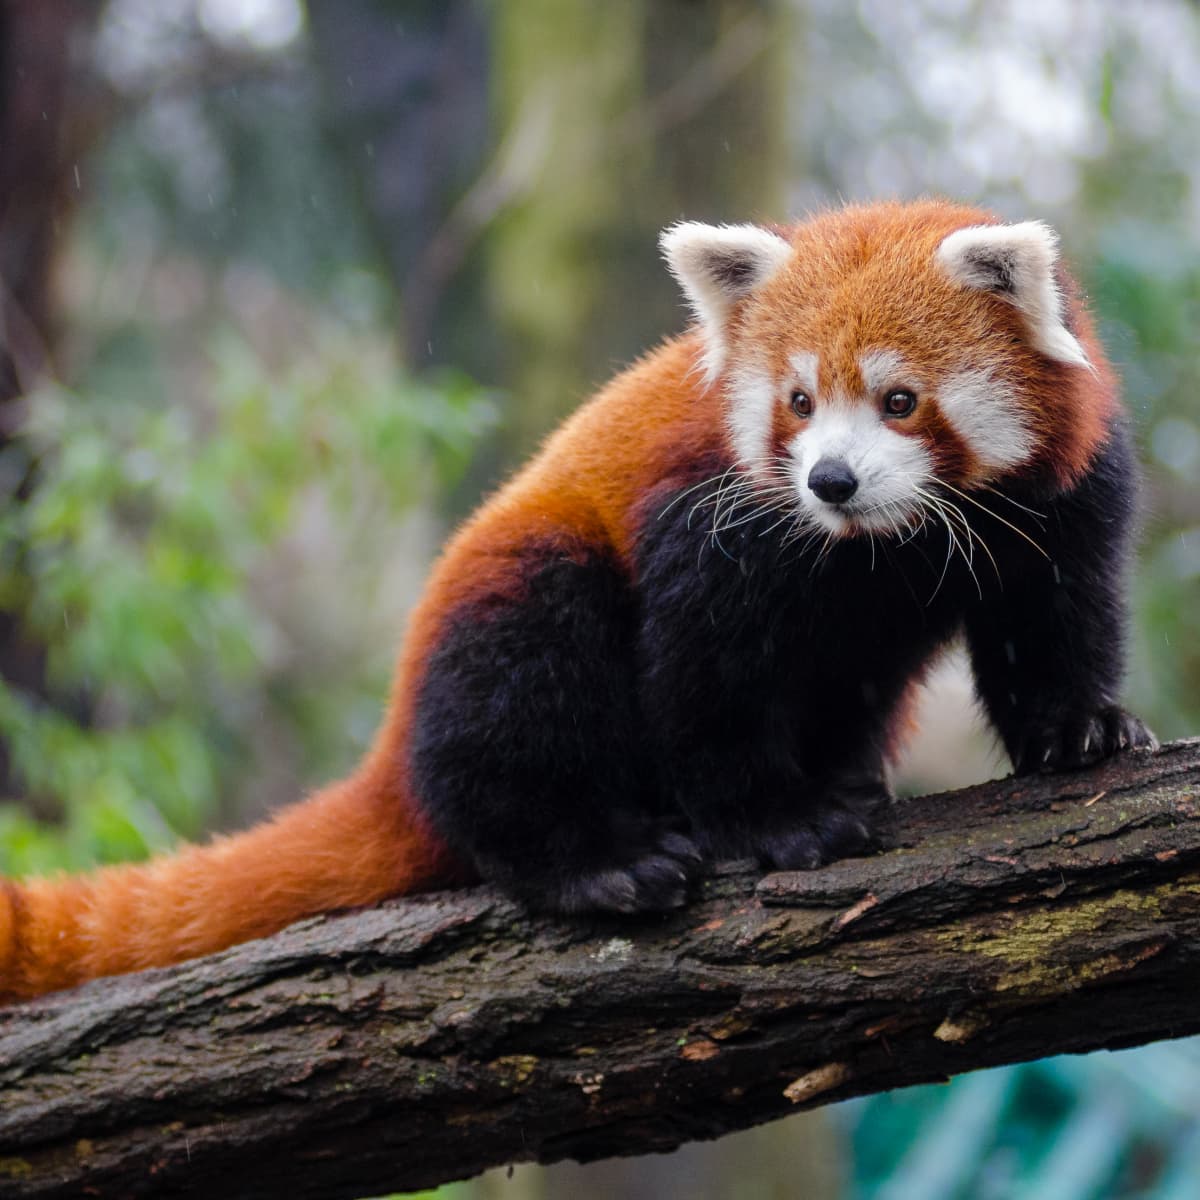 How Help Save the Red Pandas From Becoming Extinct -